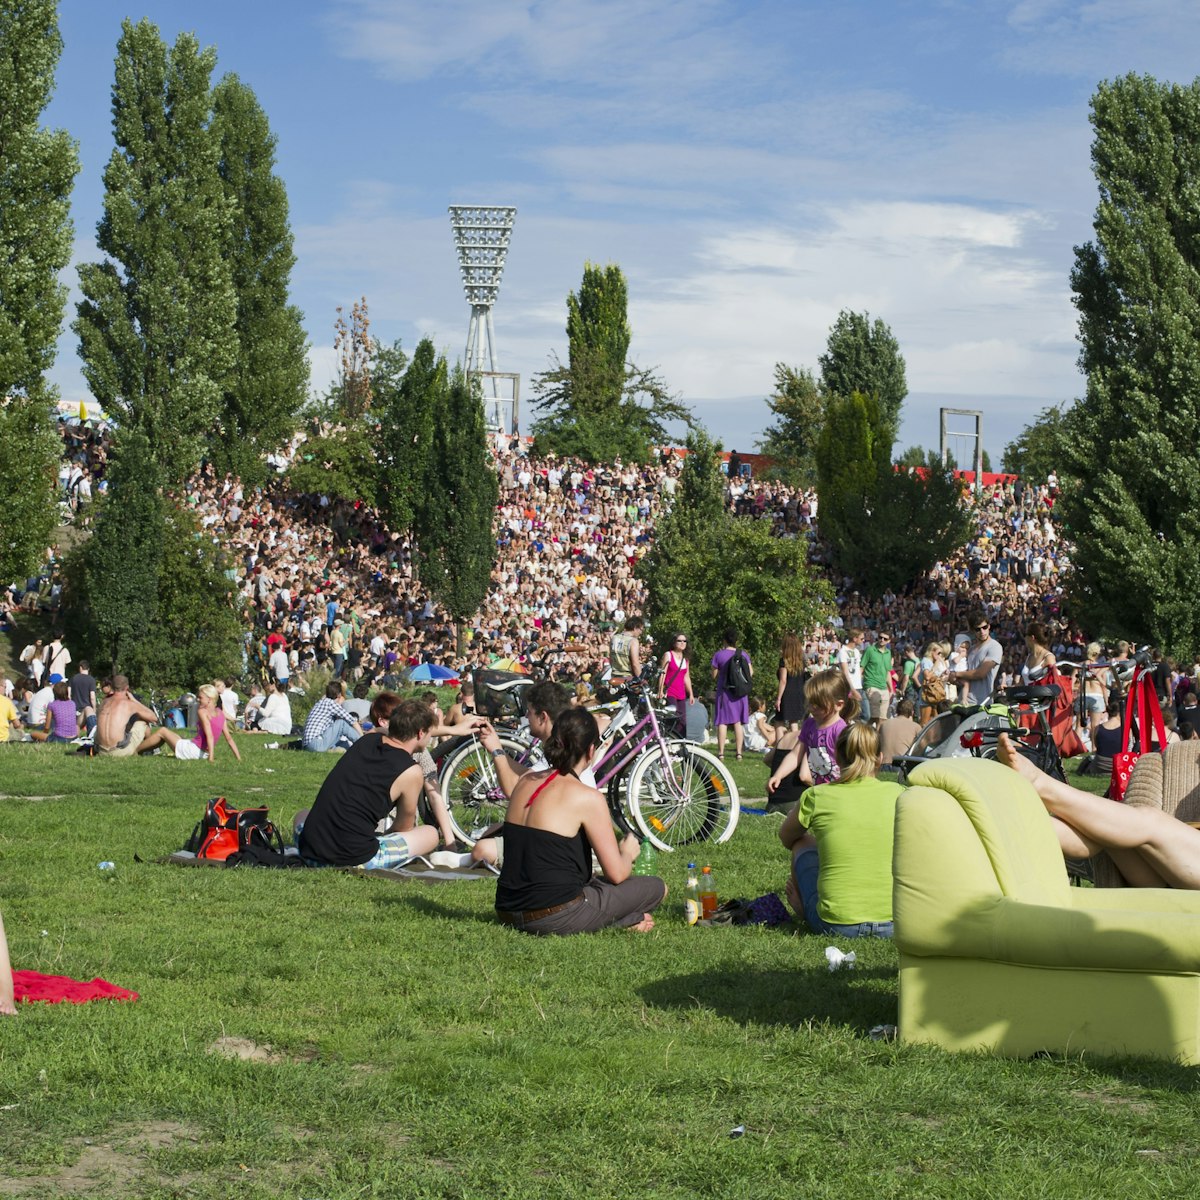 Crowd of people on a Sunday in Mauerpark (Wall Park).